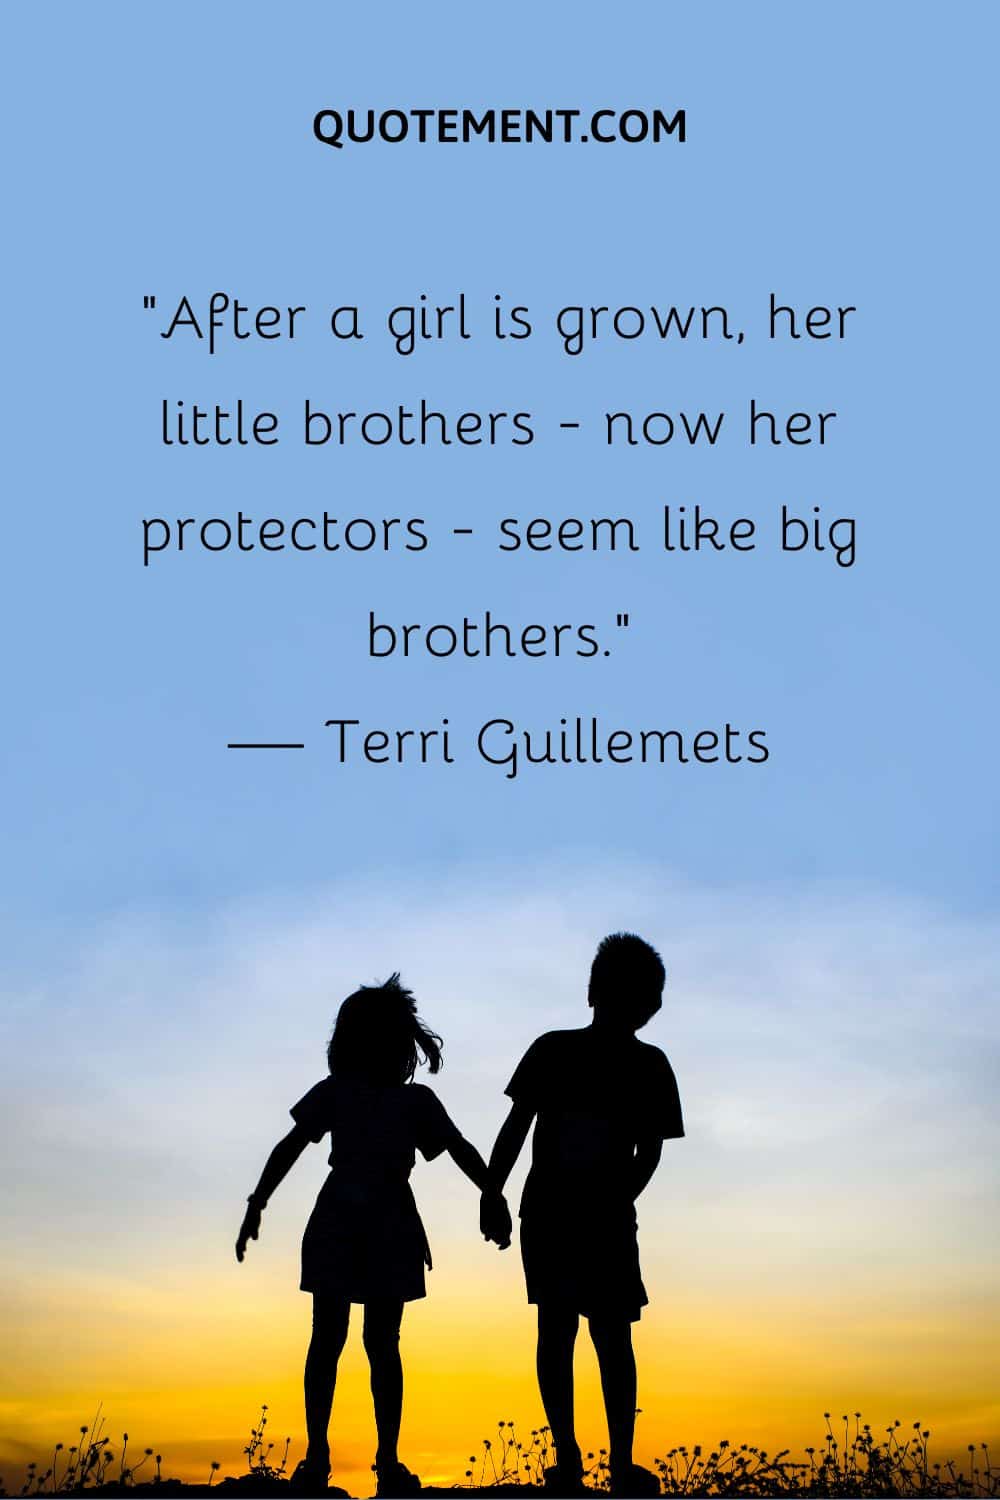 “After a girl is grown, her little brothers—now her protectors—seem like big brothers.” — Terri Guillemets